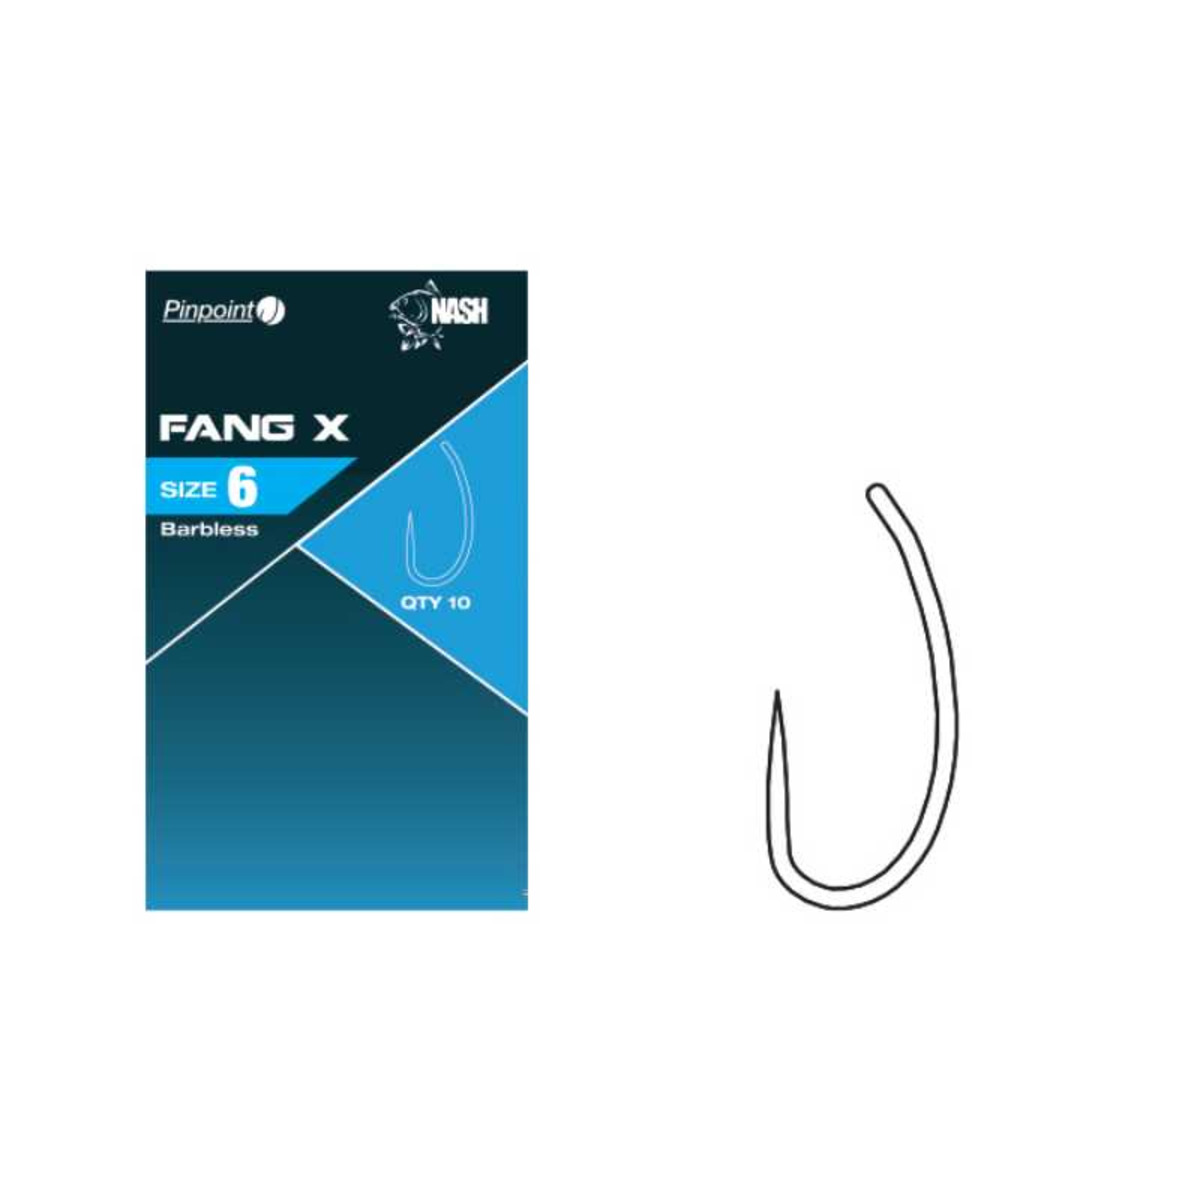 Nash Fang X - Size 6 Barbless